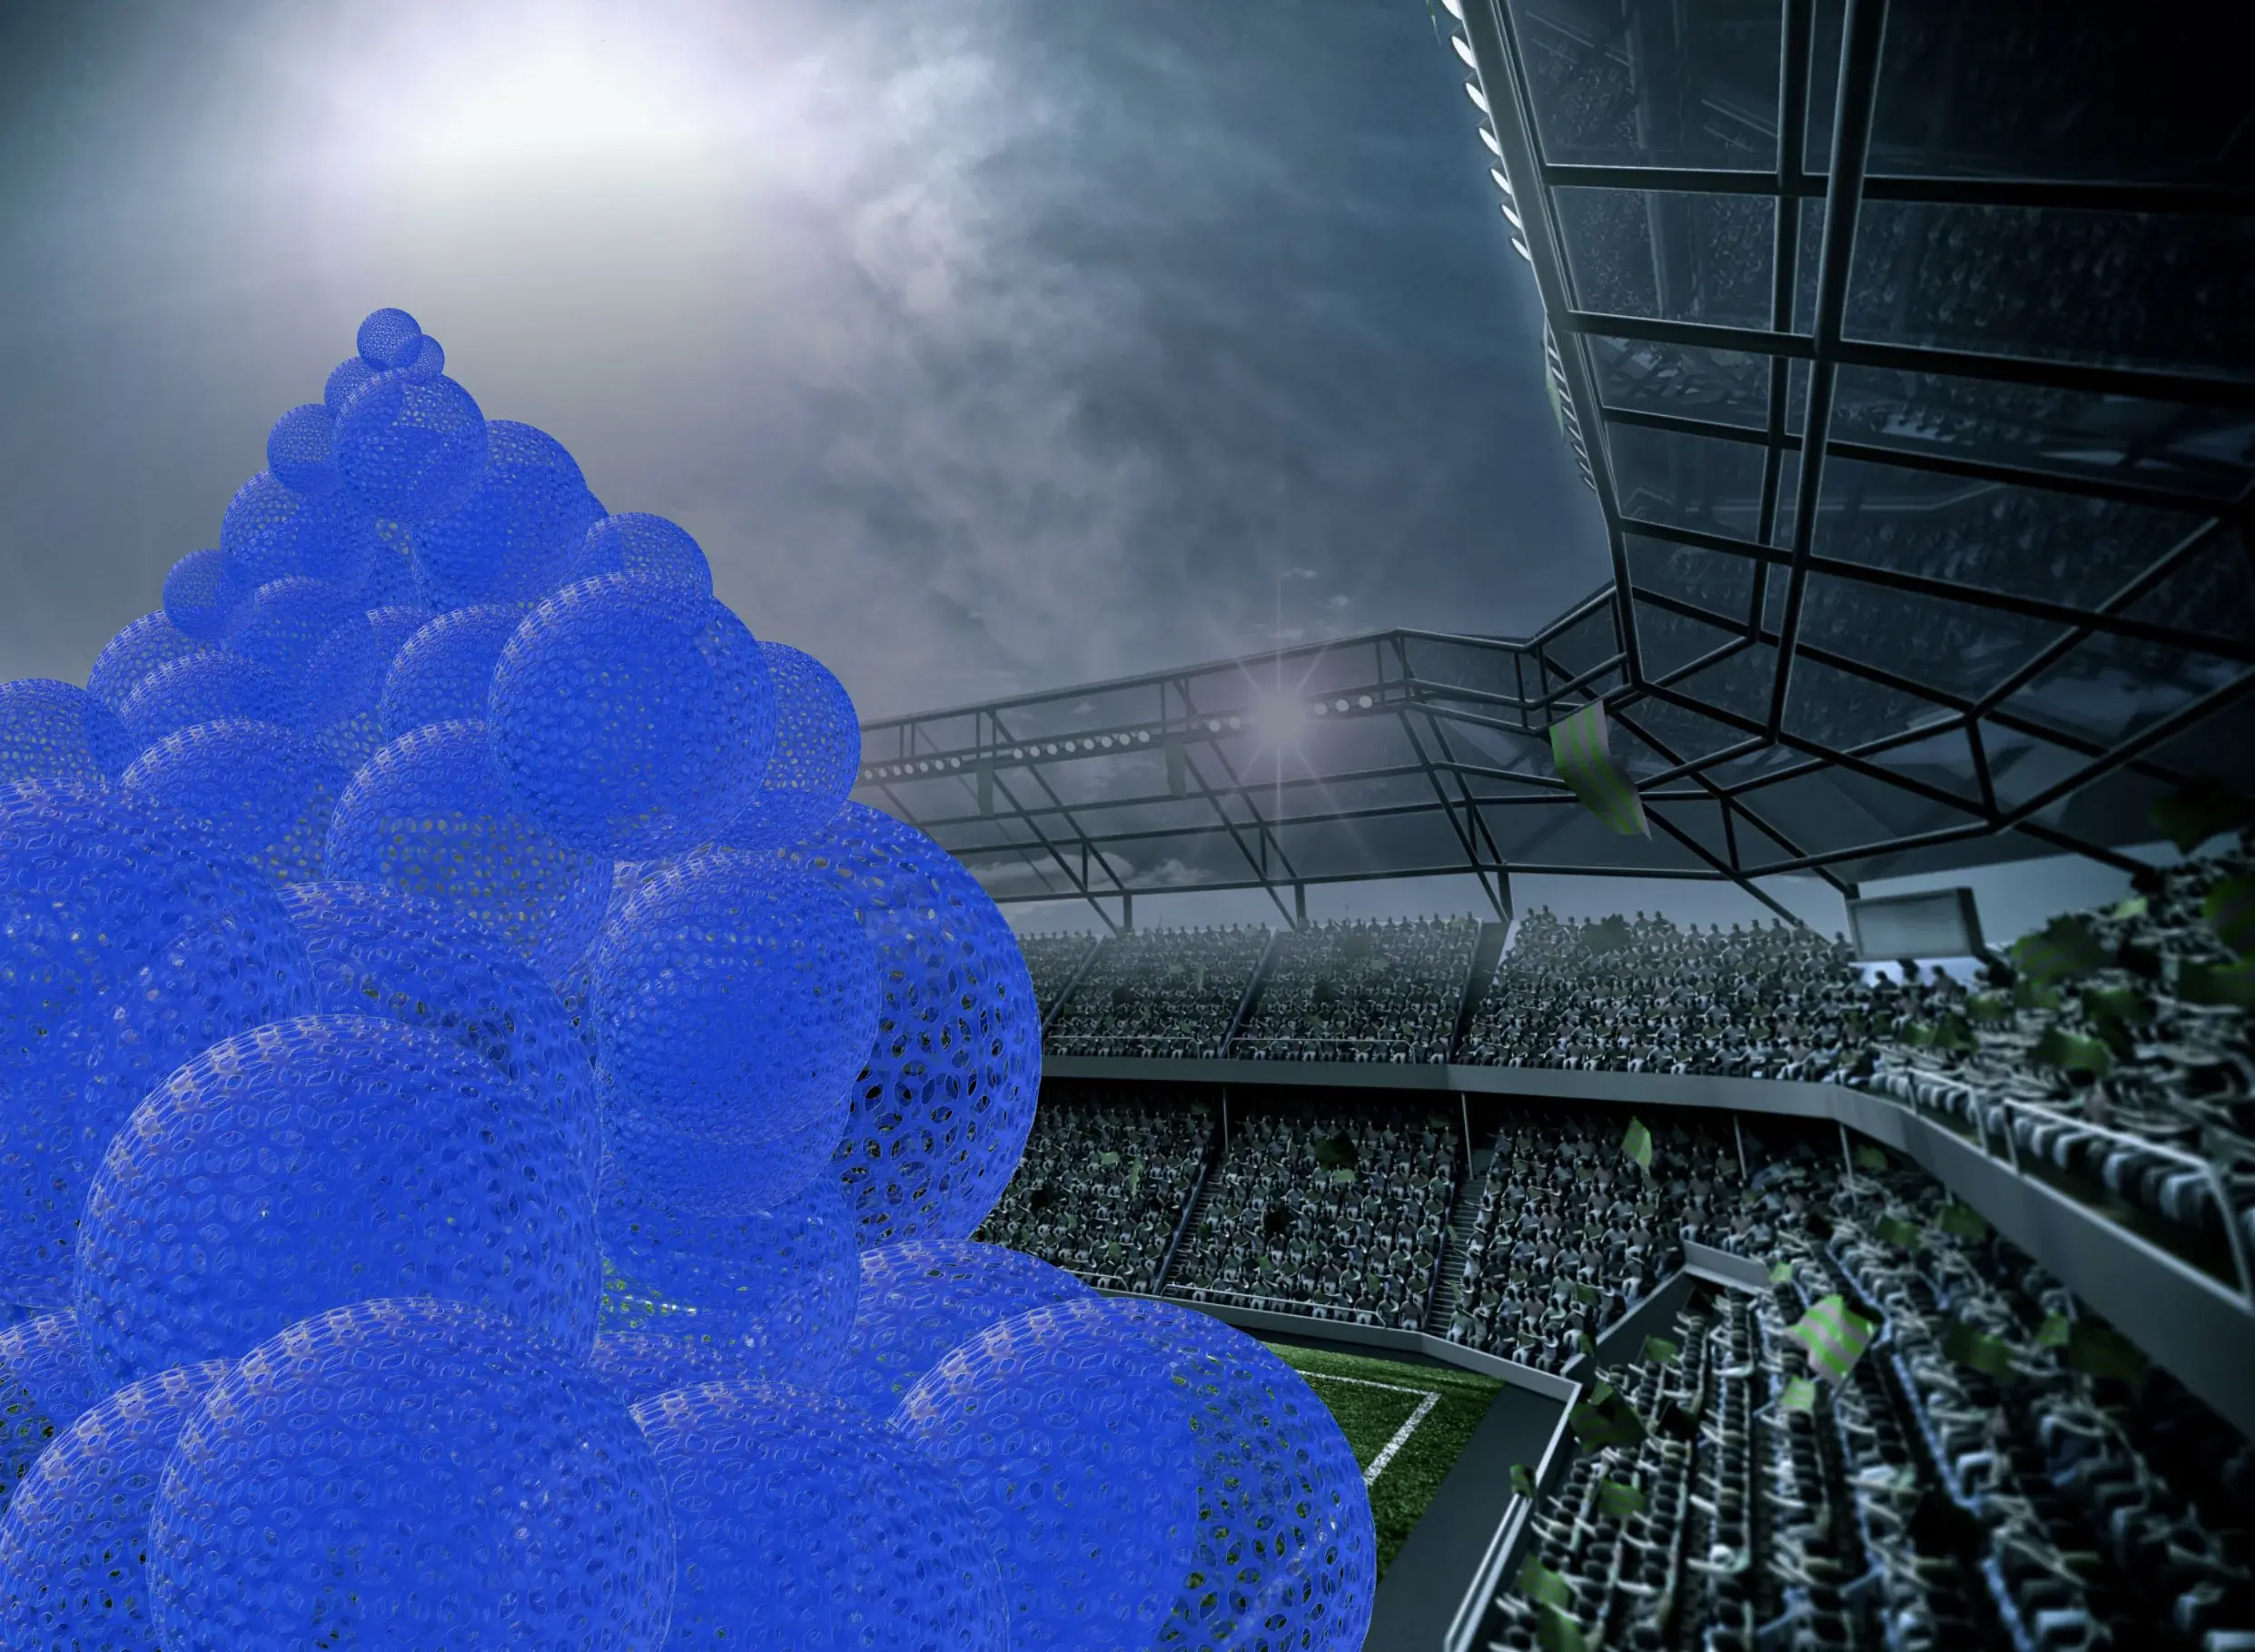 Packed stadium with pile of blue CO2 "spheres"